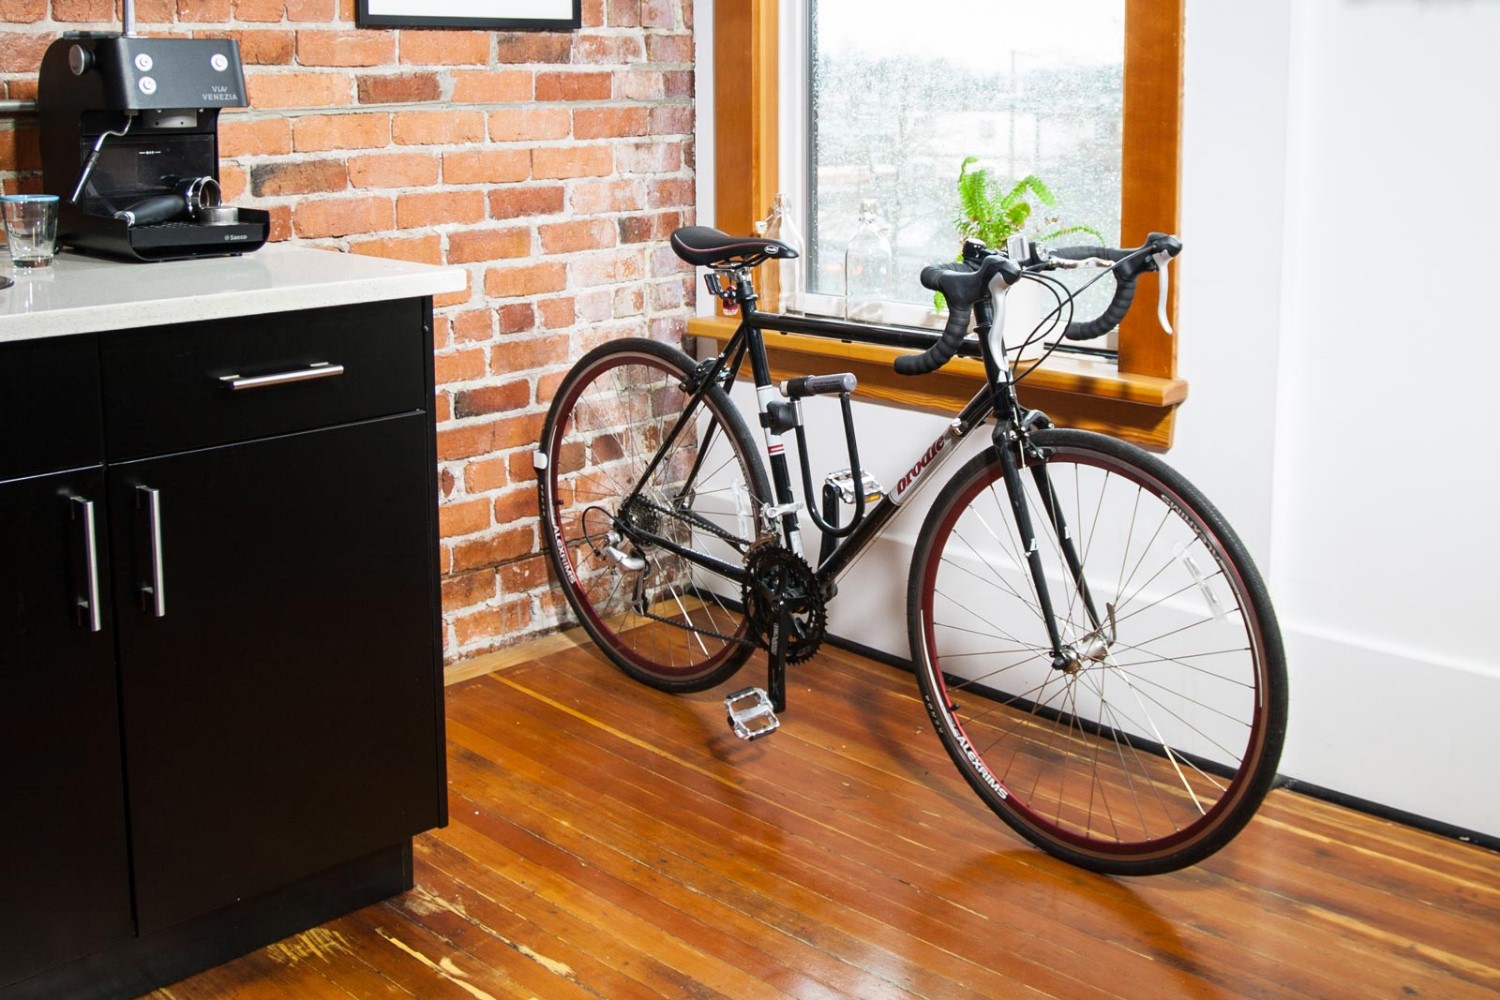 How To Store Bike In Small Apartment